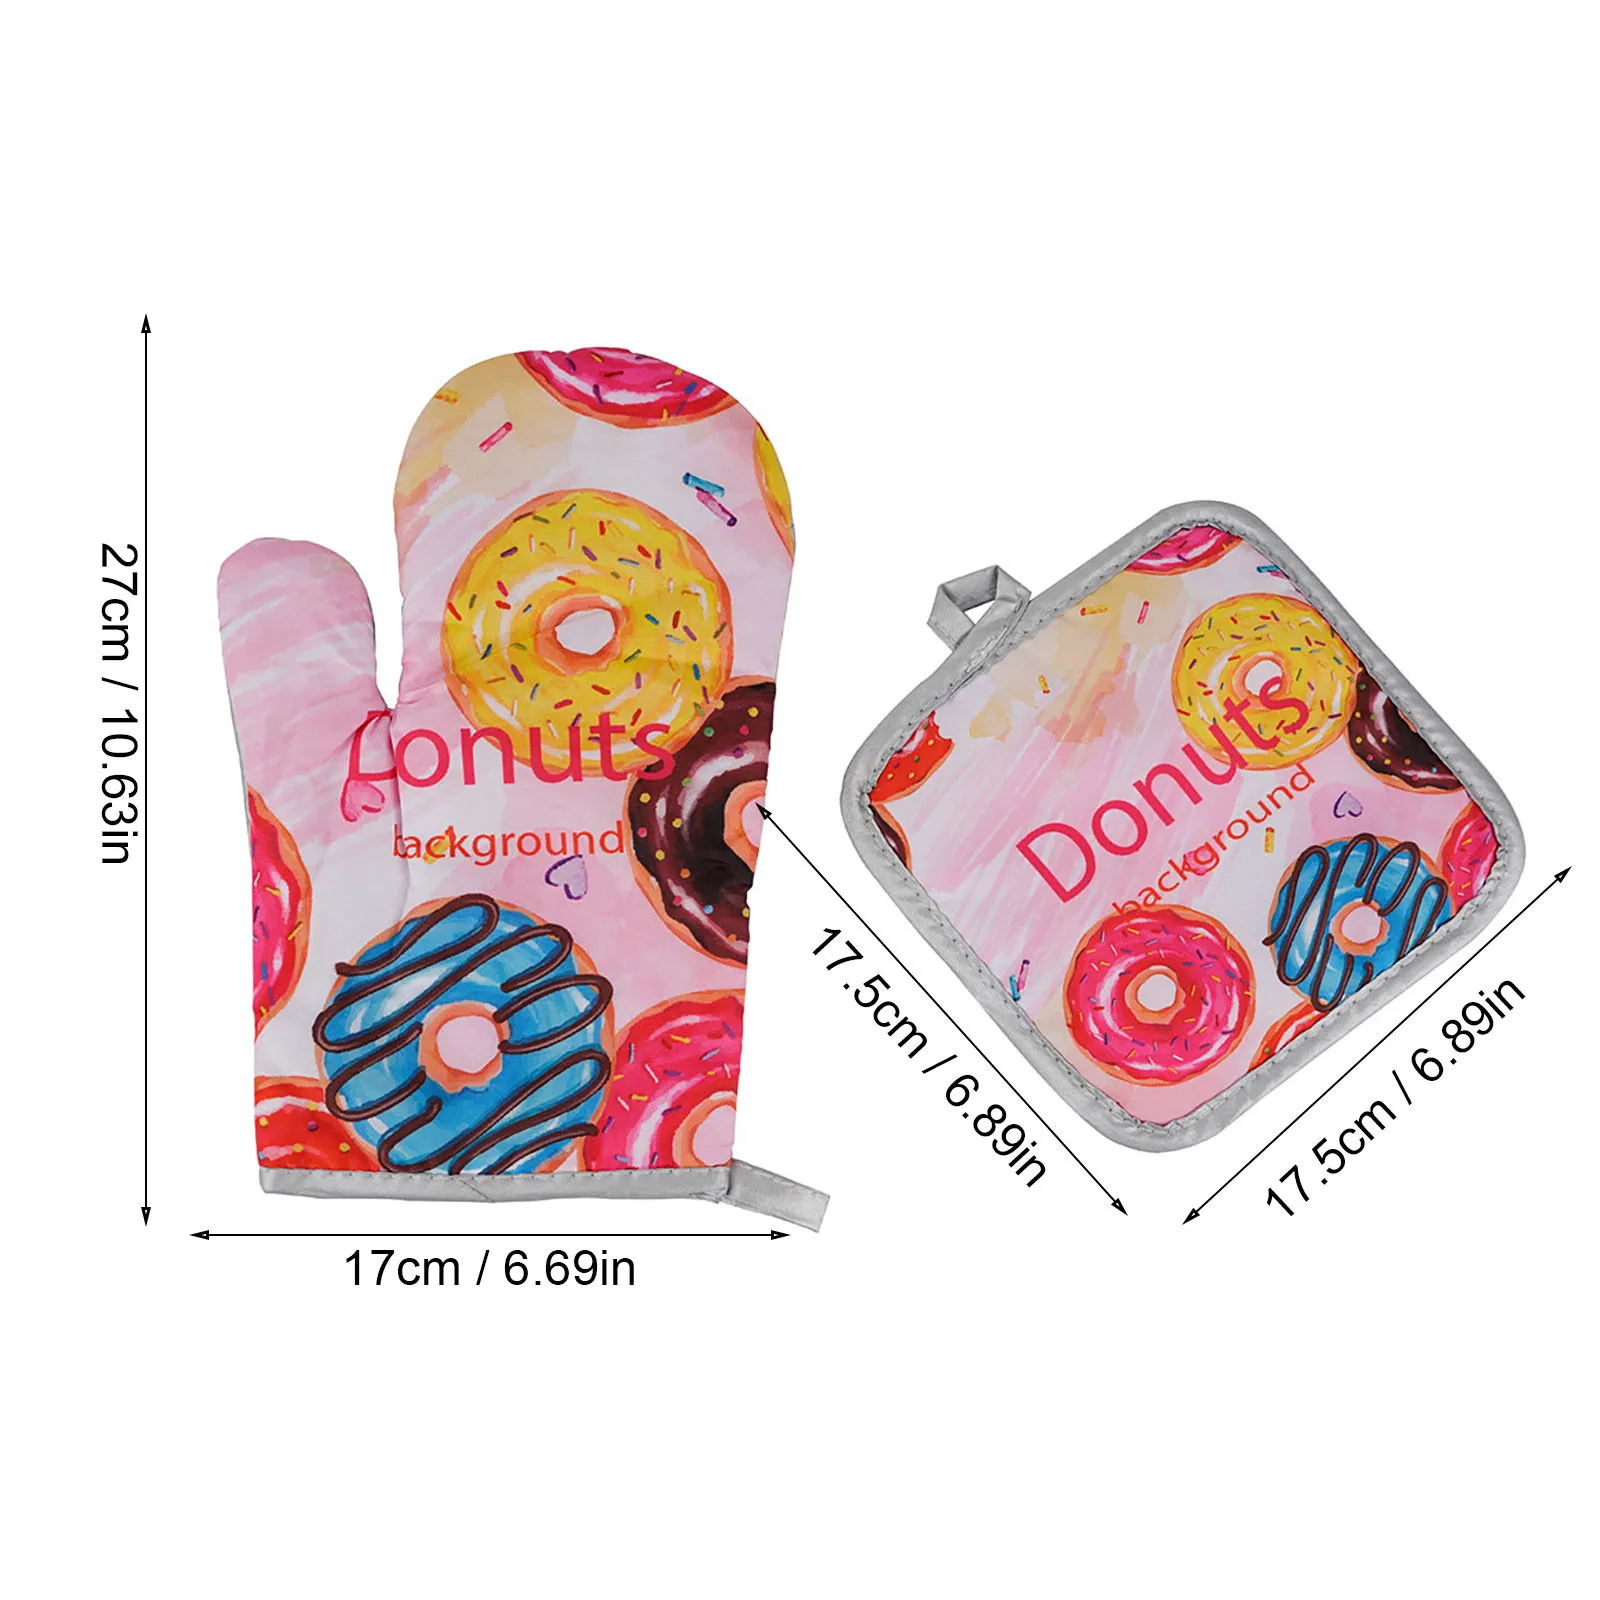 https://ae01.alicdn.com/kf/S8194583d449349c488e12264165e7423A/2pcs-Kitchen-Potholders-Pad-and-Stove-Oven-Gloves-Set-Mitts-Heat-Resistant-Thermal-Anti-heat-Take.jpg